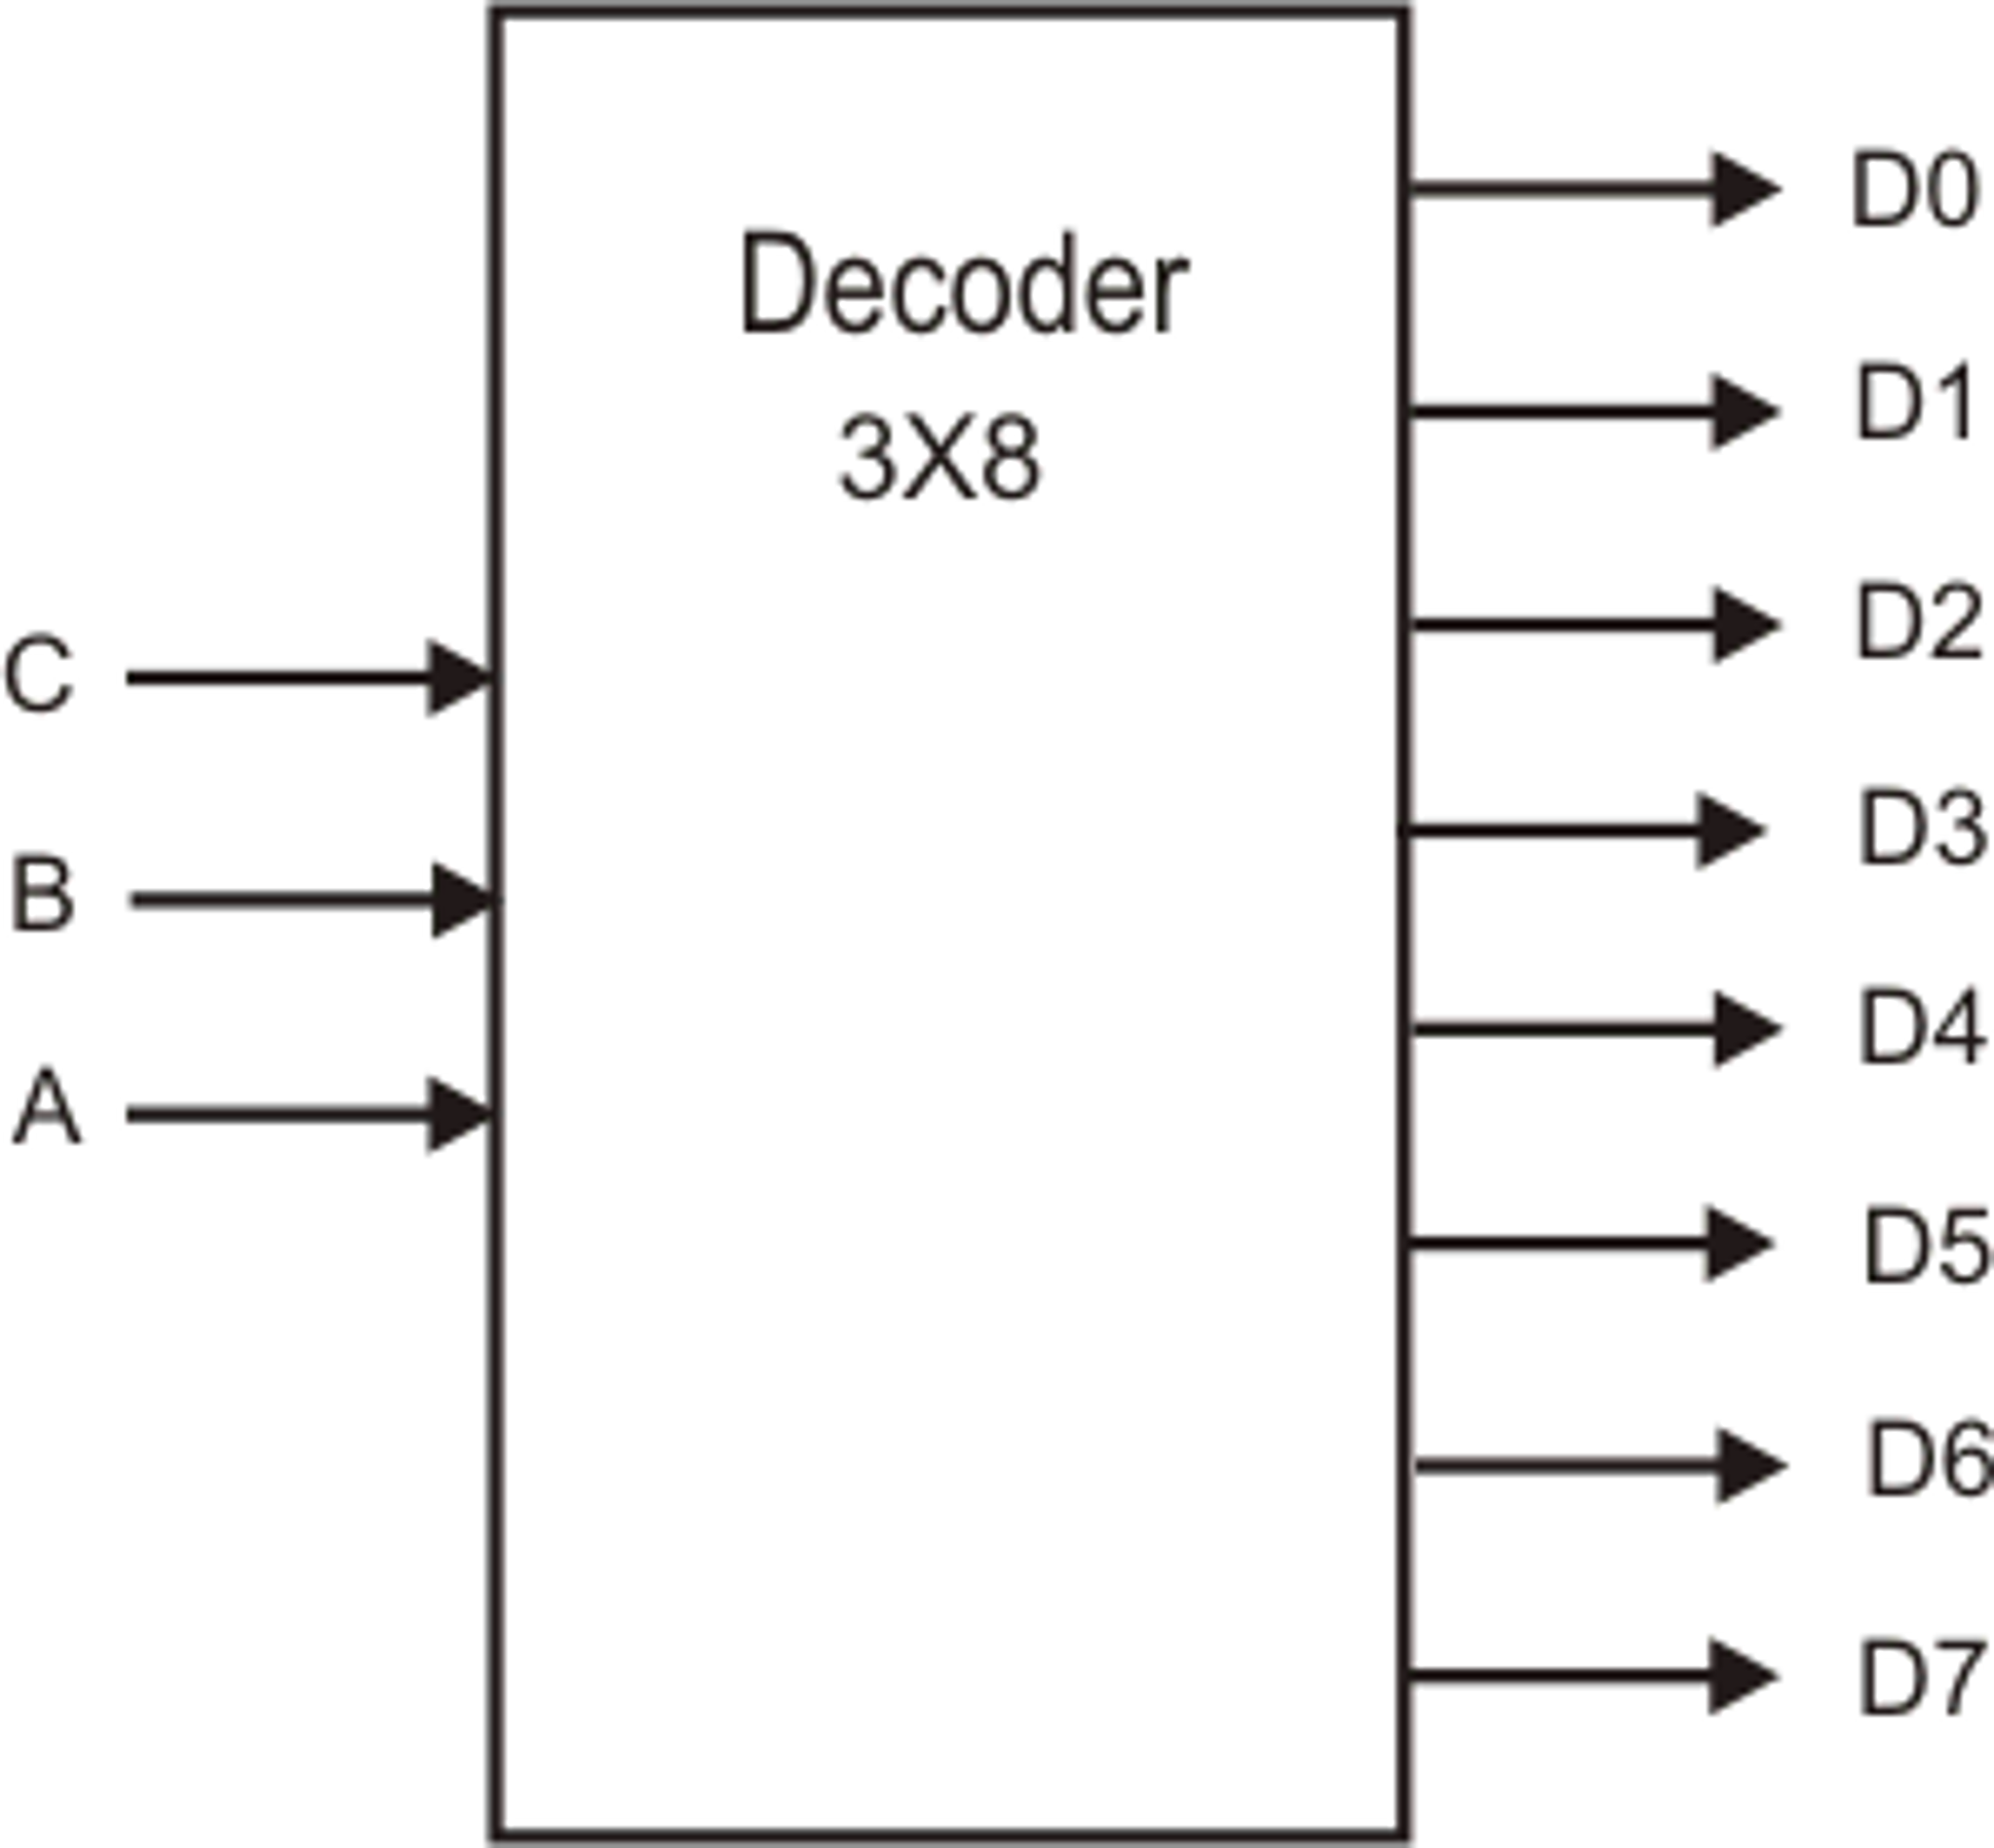 Write a verilog code with its testbench for a 4x16 decoder using 3x8 decode...